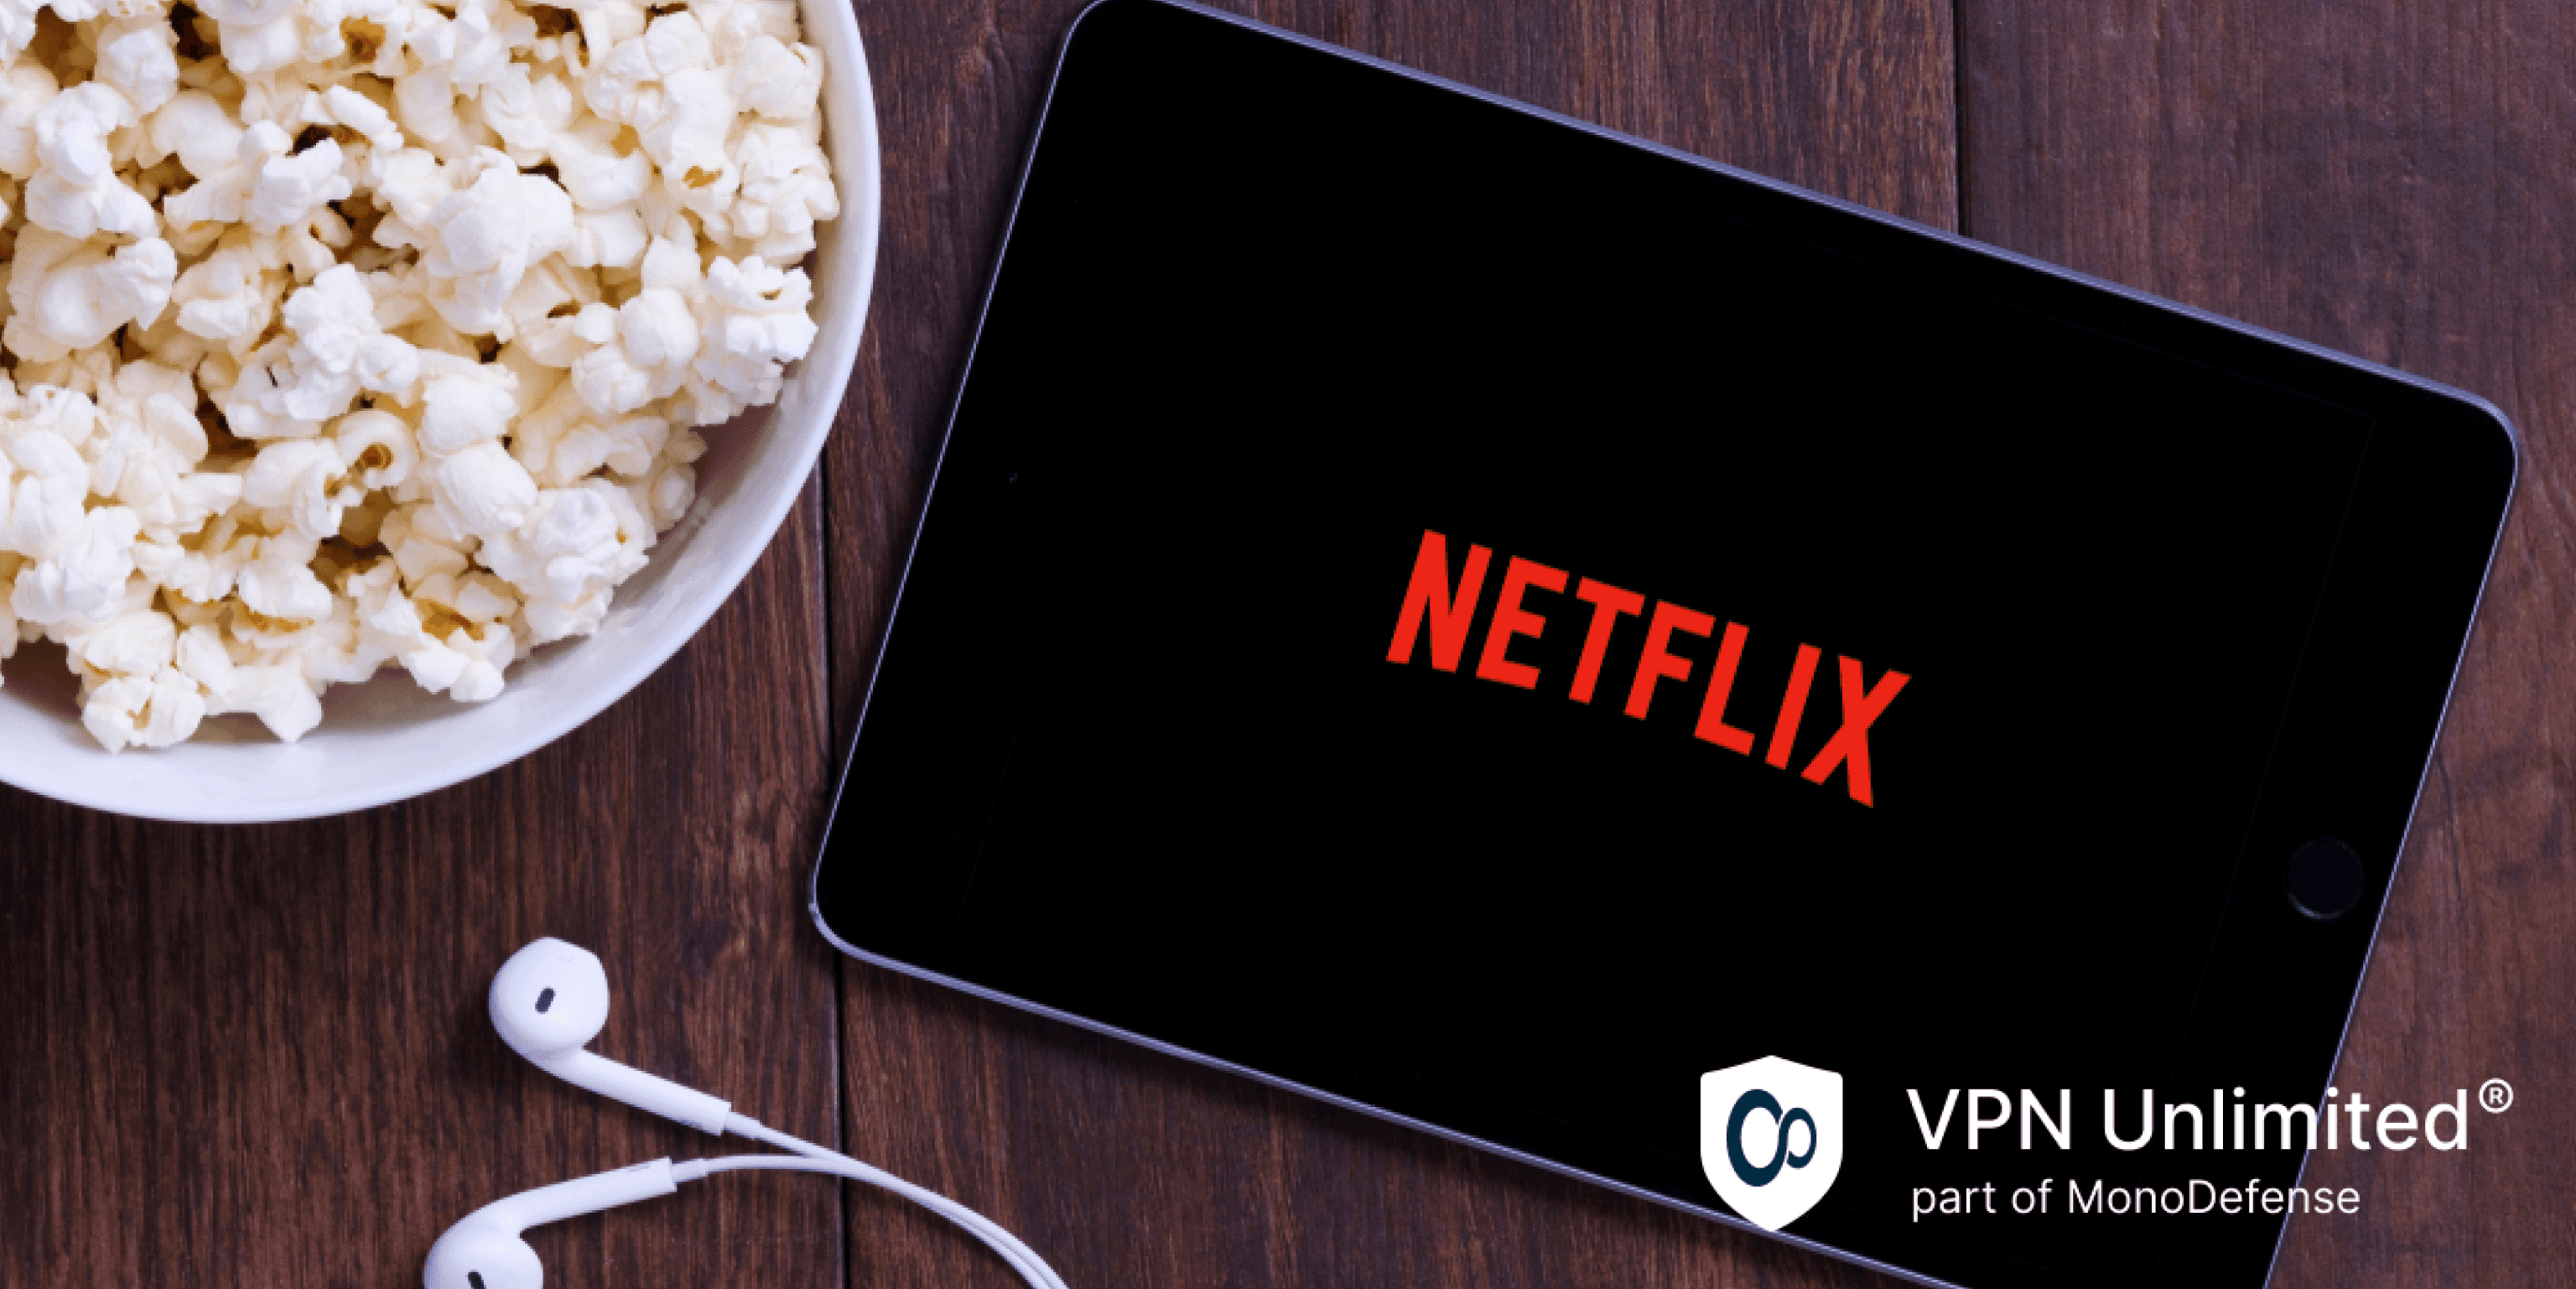 Table with popcorn bottle and Netflix logo on Apple Ipad mini and earphone, streaming Netflix with VPN Unlimited